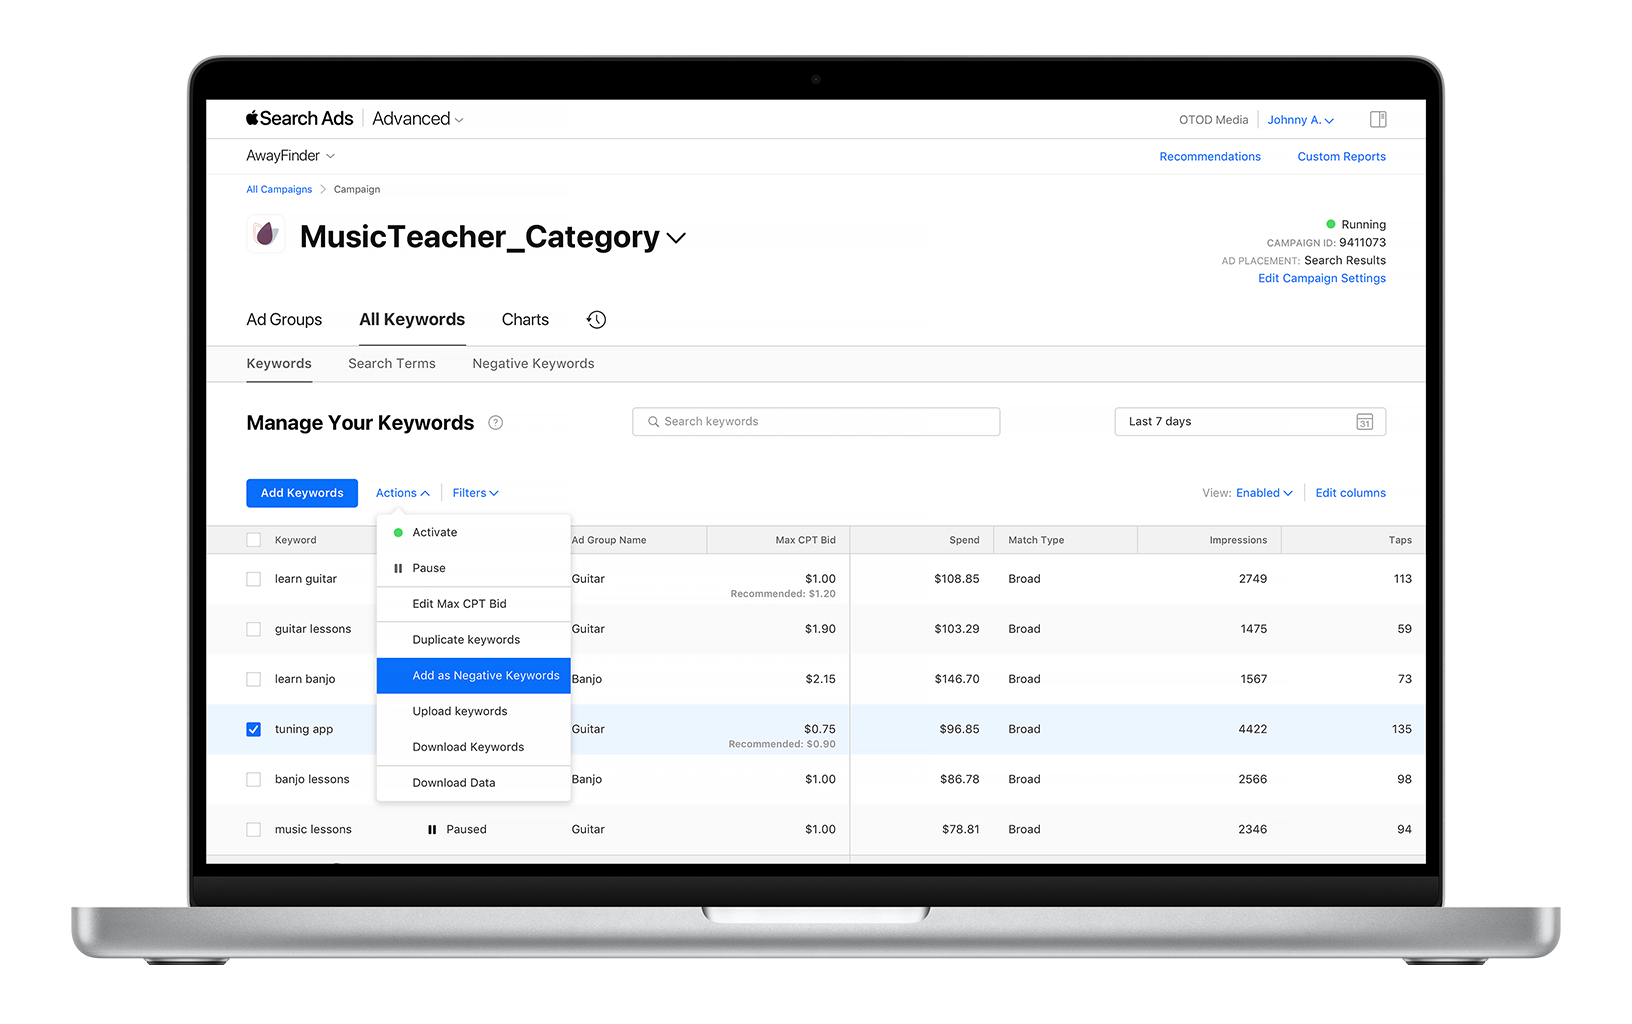 The Campaigns dashboard is open for an example app, Music Teacher. The checkbox next to the keyword "tuning app" is selected, the Actions menu is open, and Add as Negative Keywords is selected.